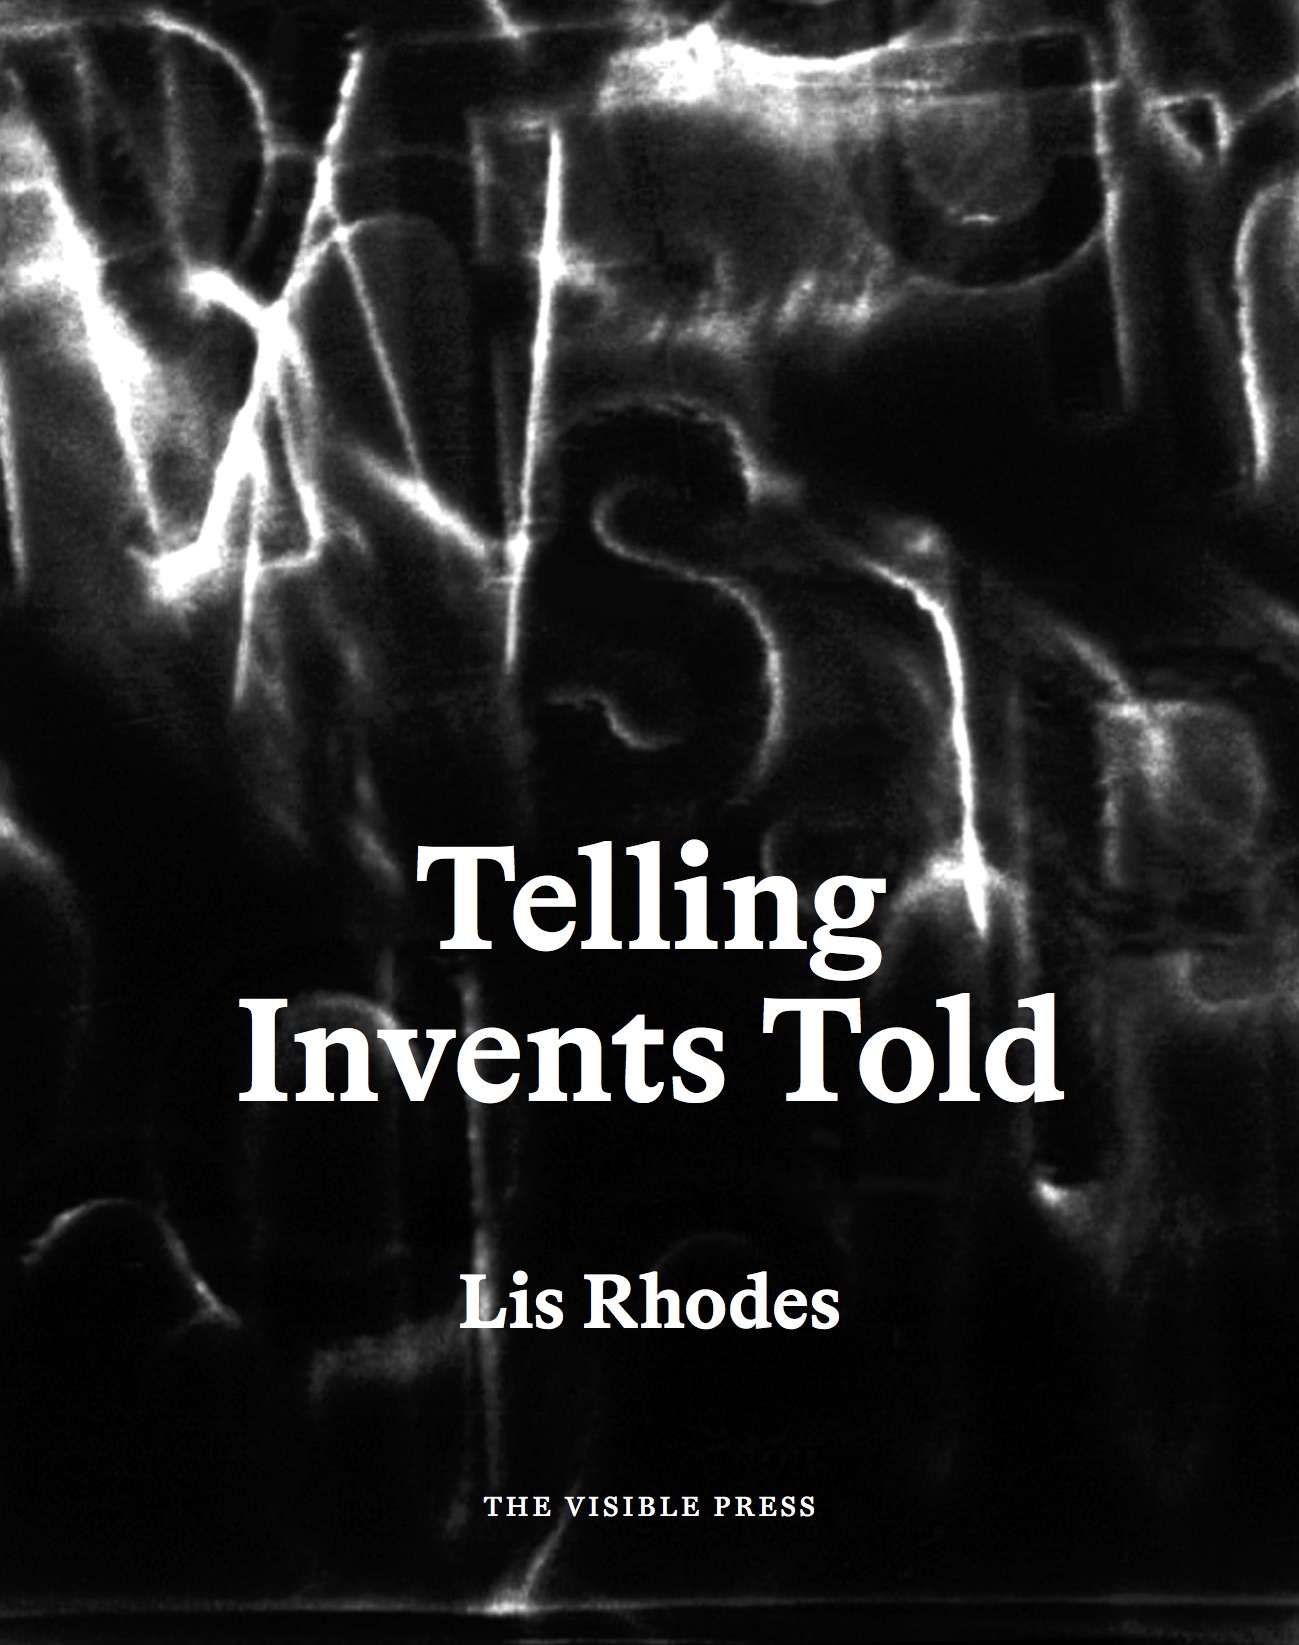 Book Cover of 'Telling Invents Told' by Lis Rhodes. Credit: Courtesy of LUX Scotland